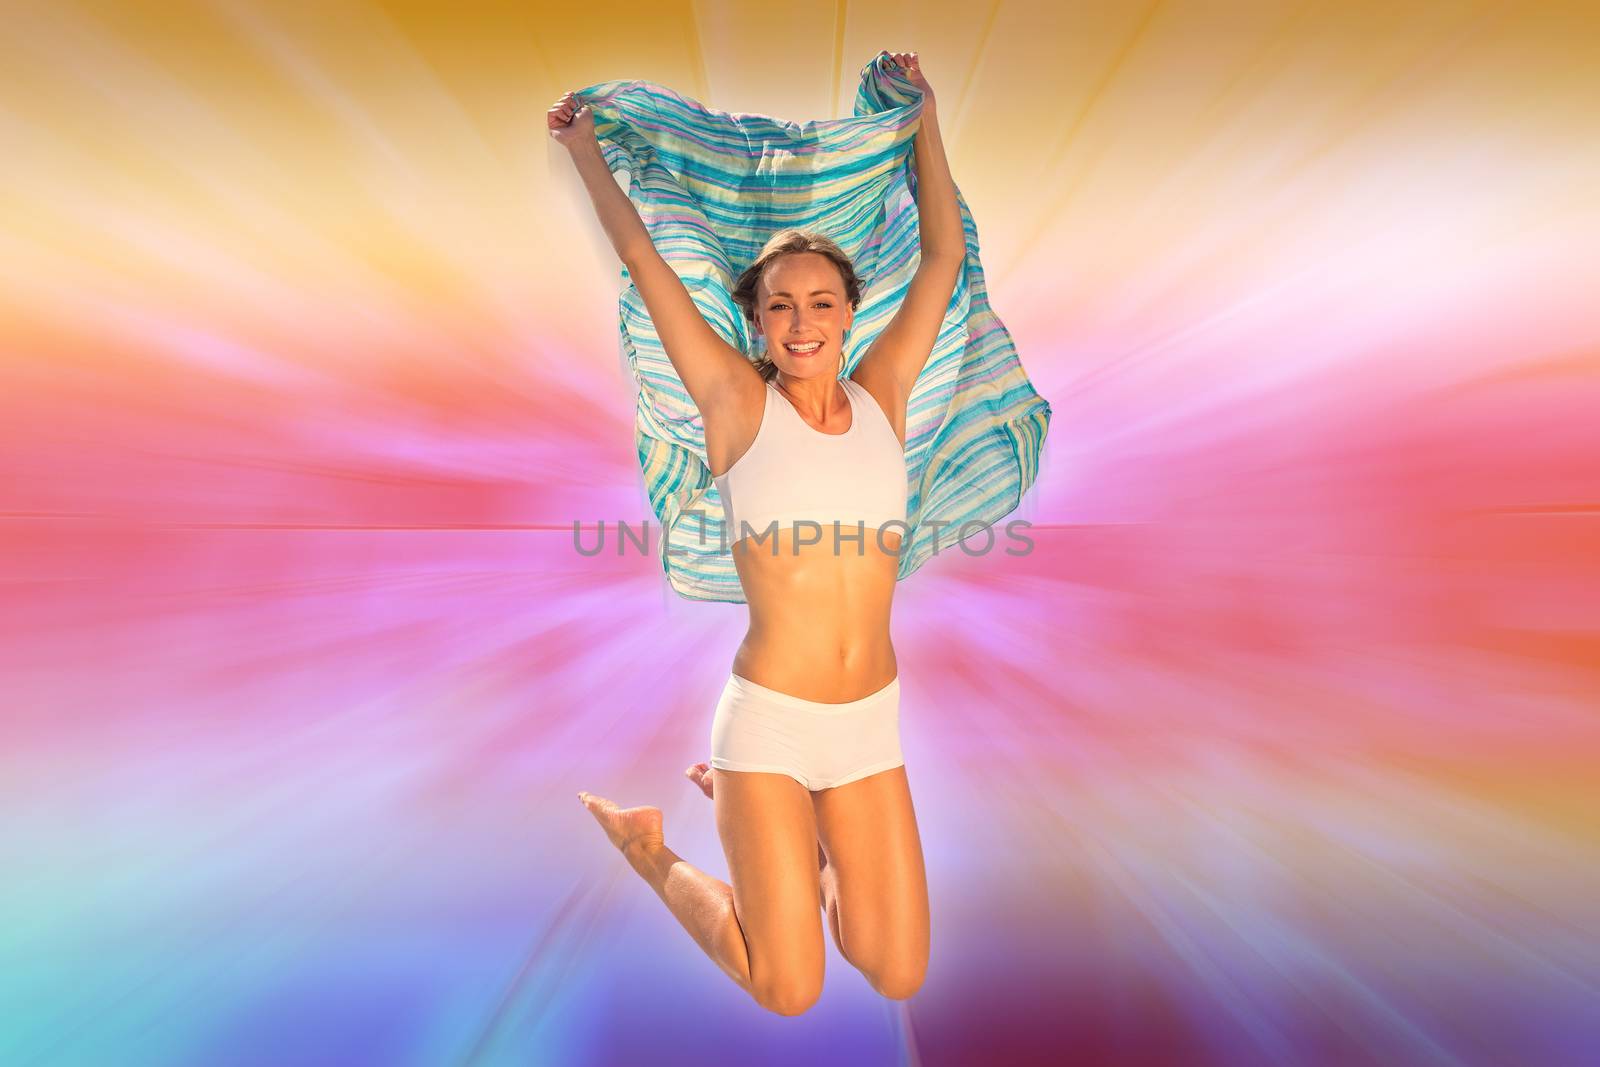 Gorgeous fit blonde jumping with scarf against abstract background